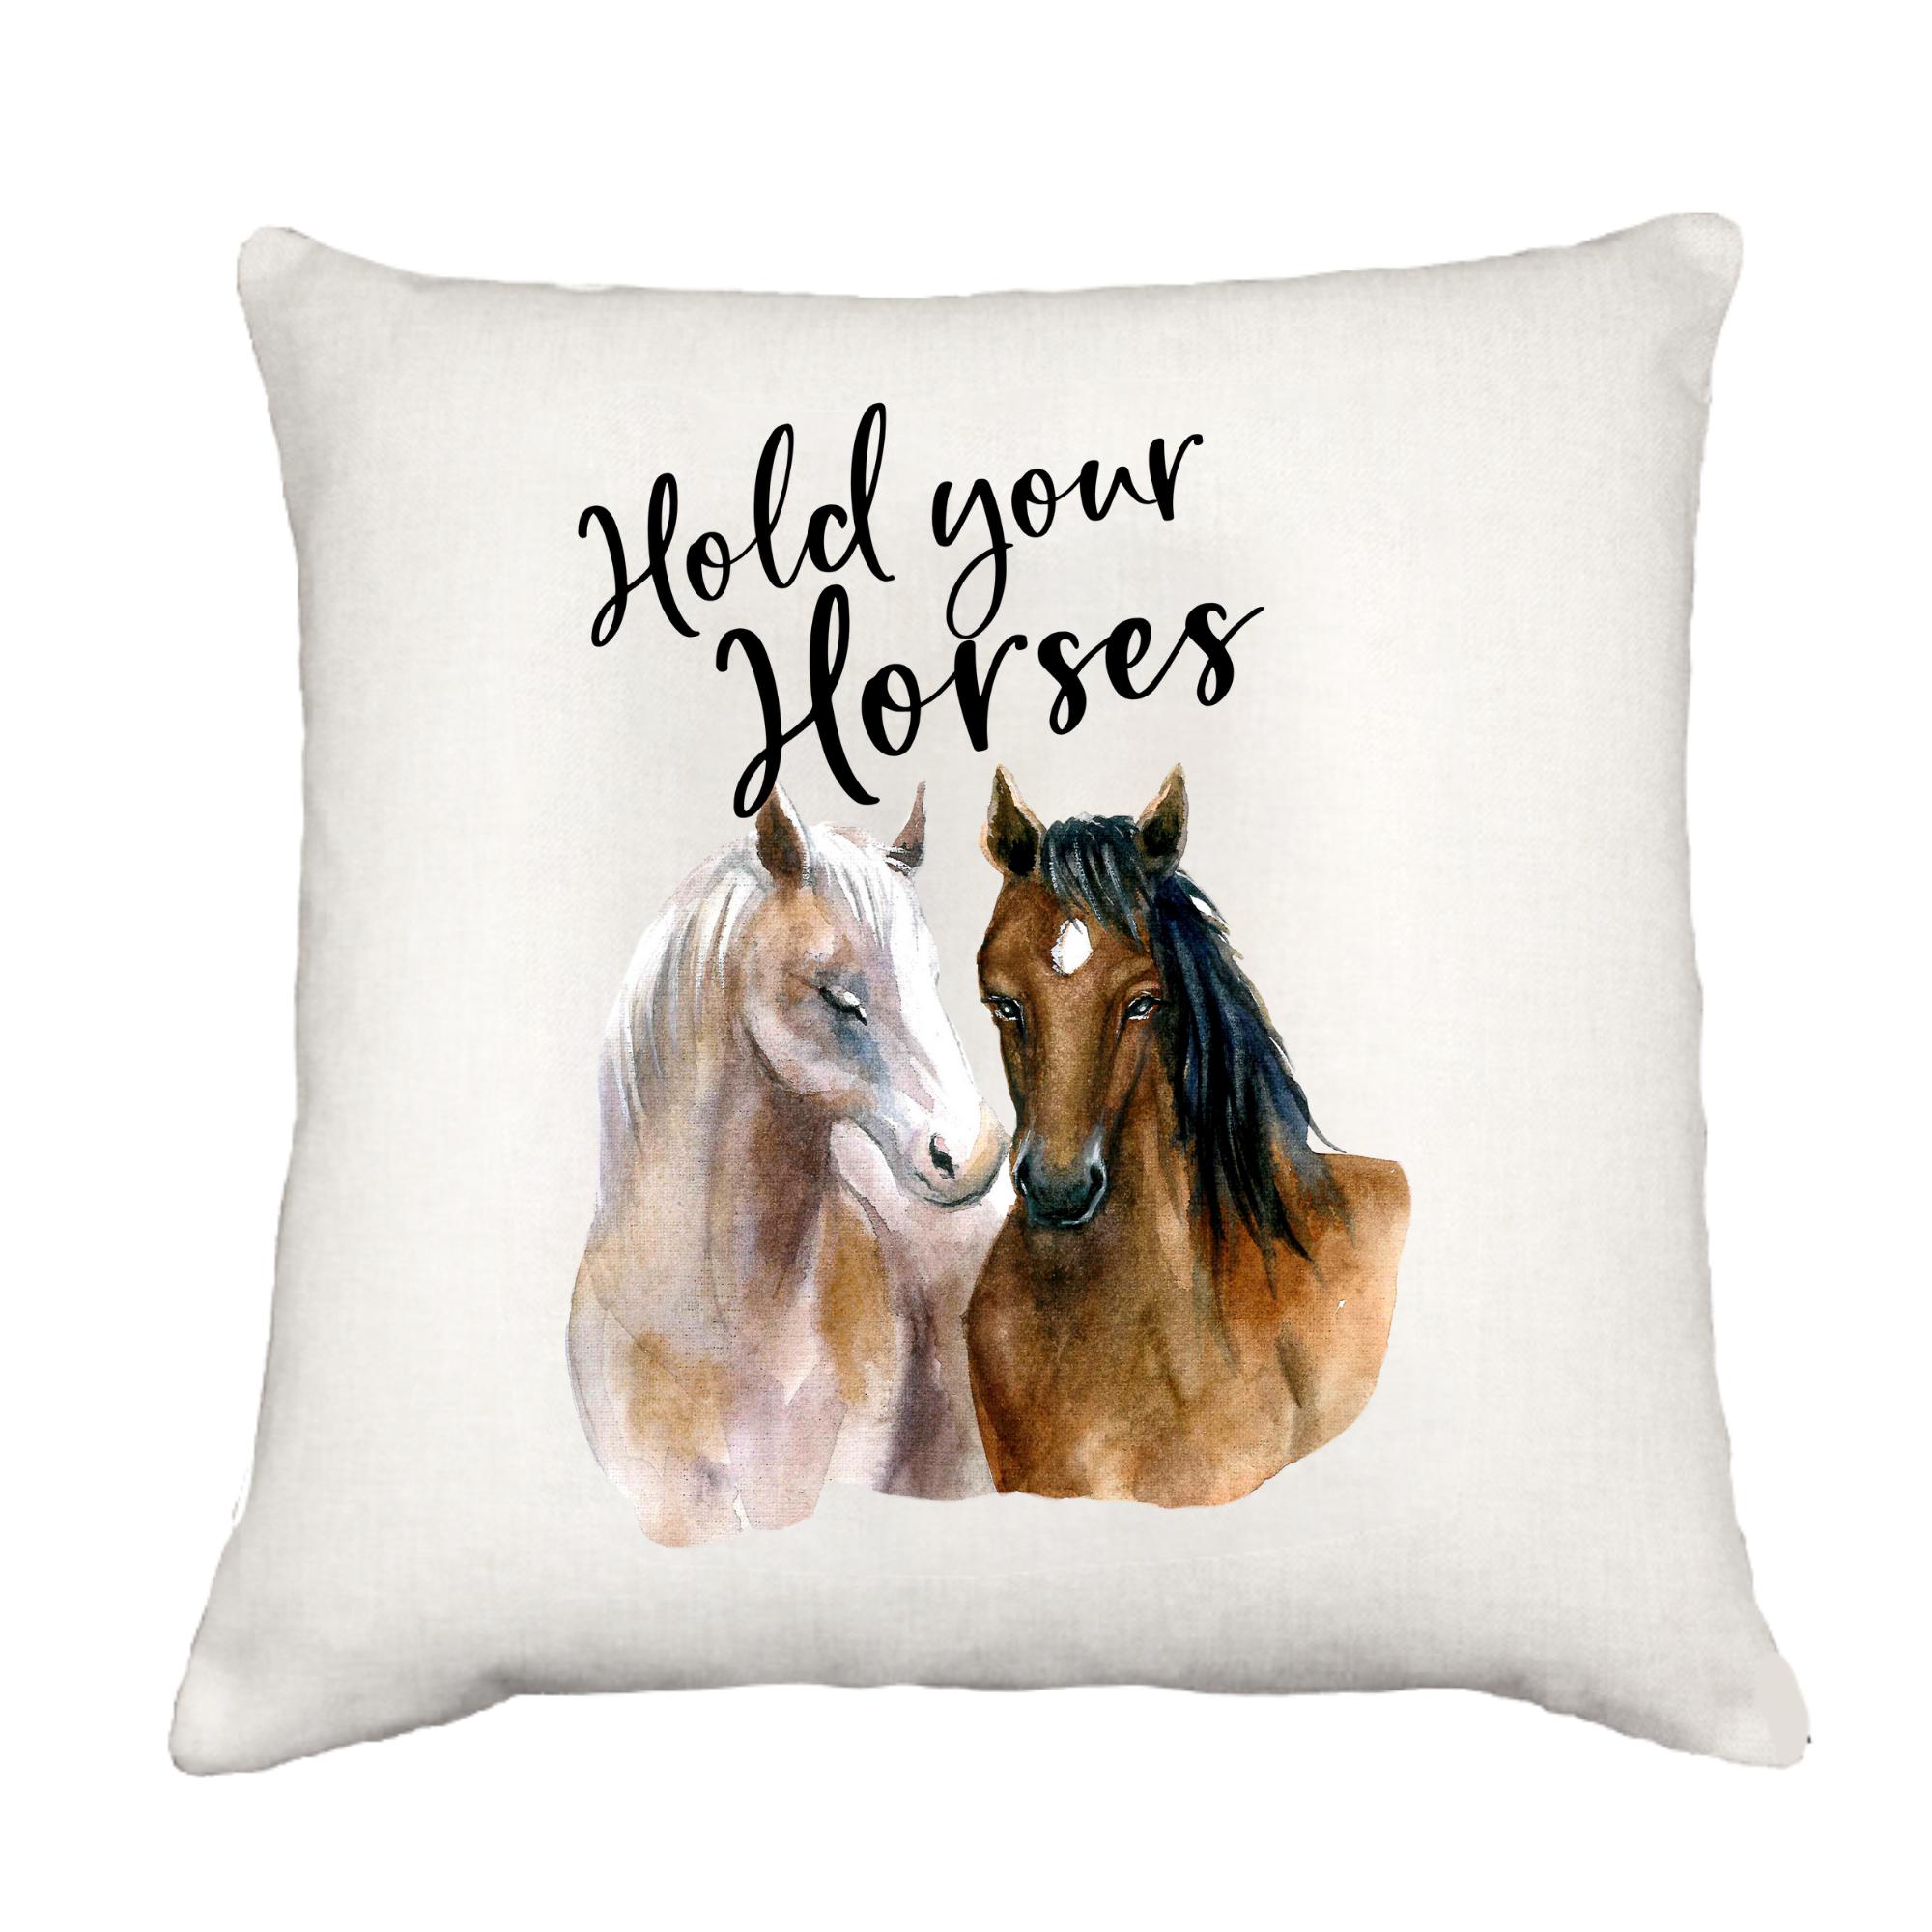 Hold Your Horses Down Pillow